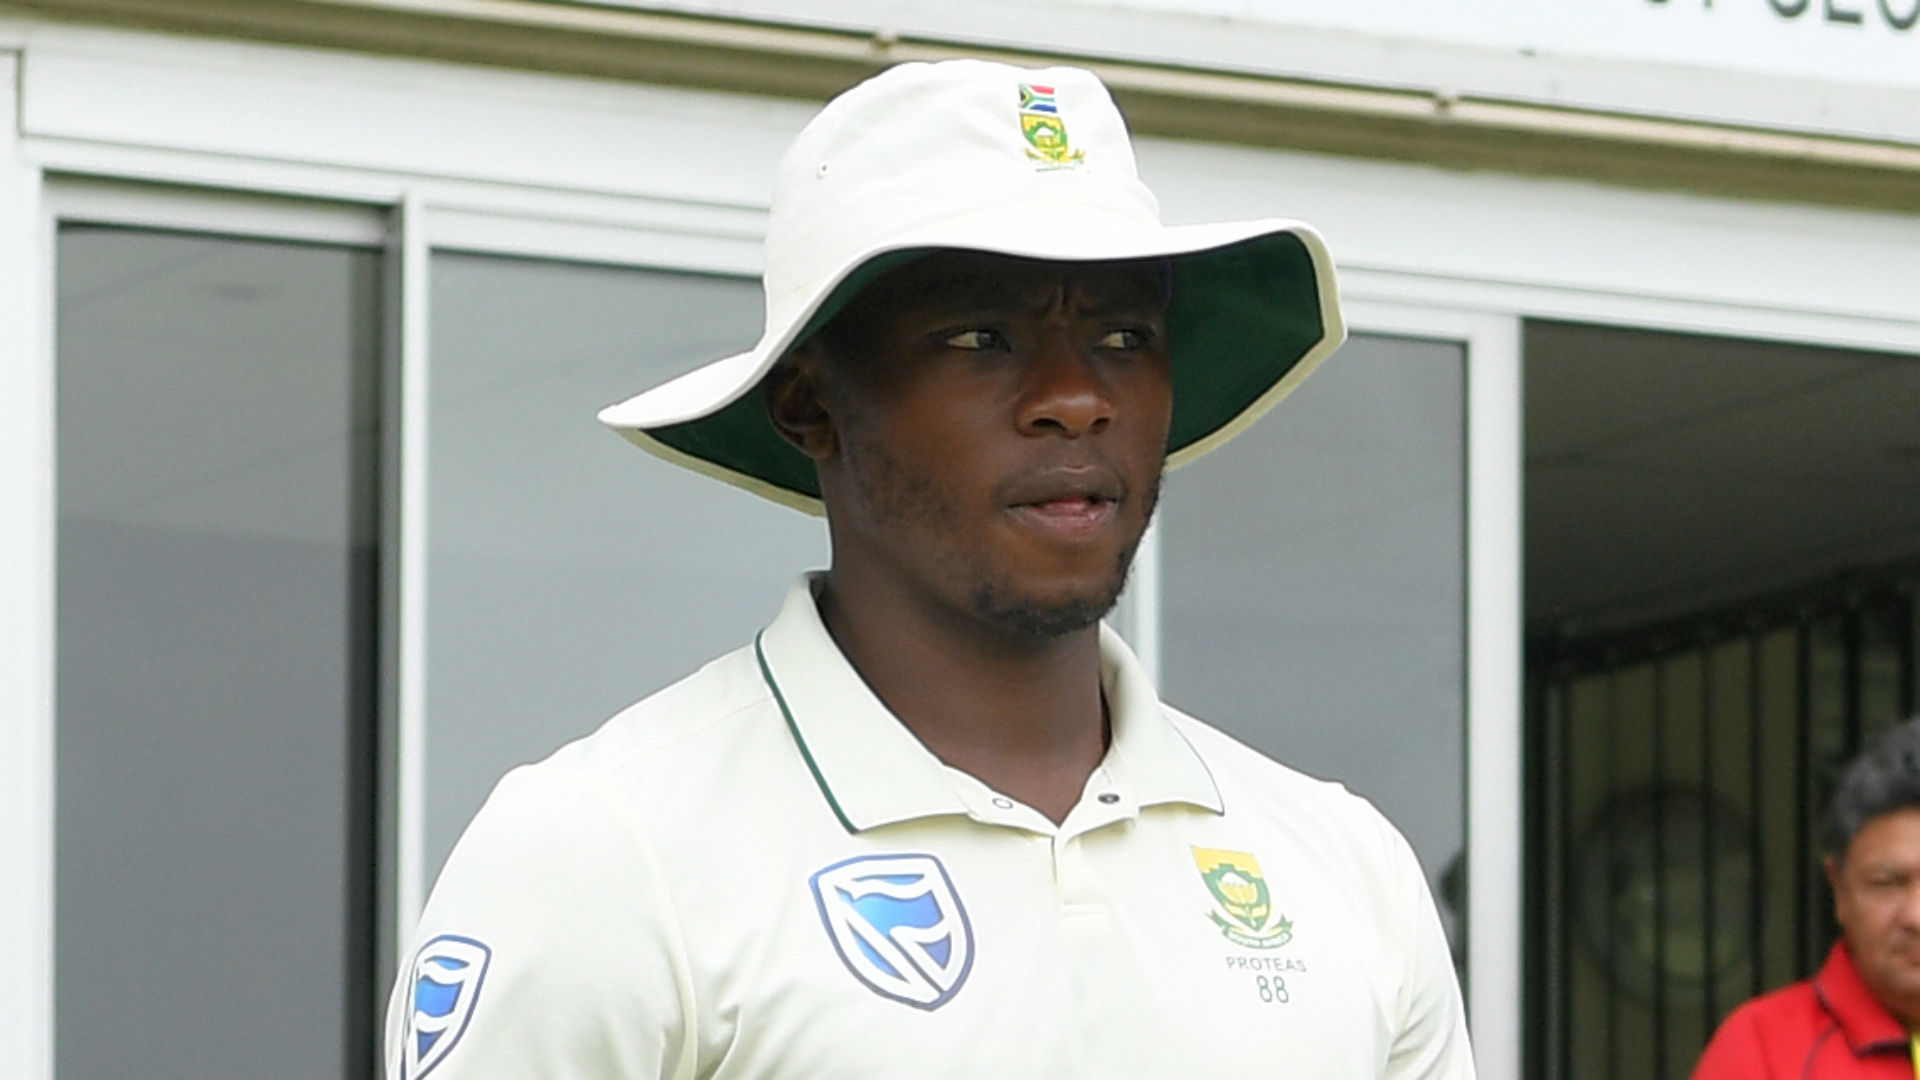 South Africa's players have lost their freedom but are aware how lucky they are, says Kagiso Rabada ahead of the T20 series against England.